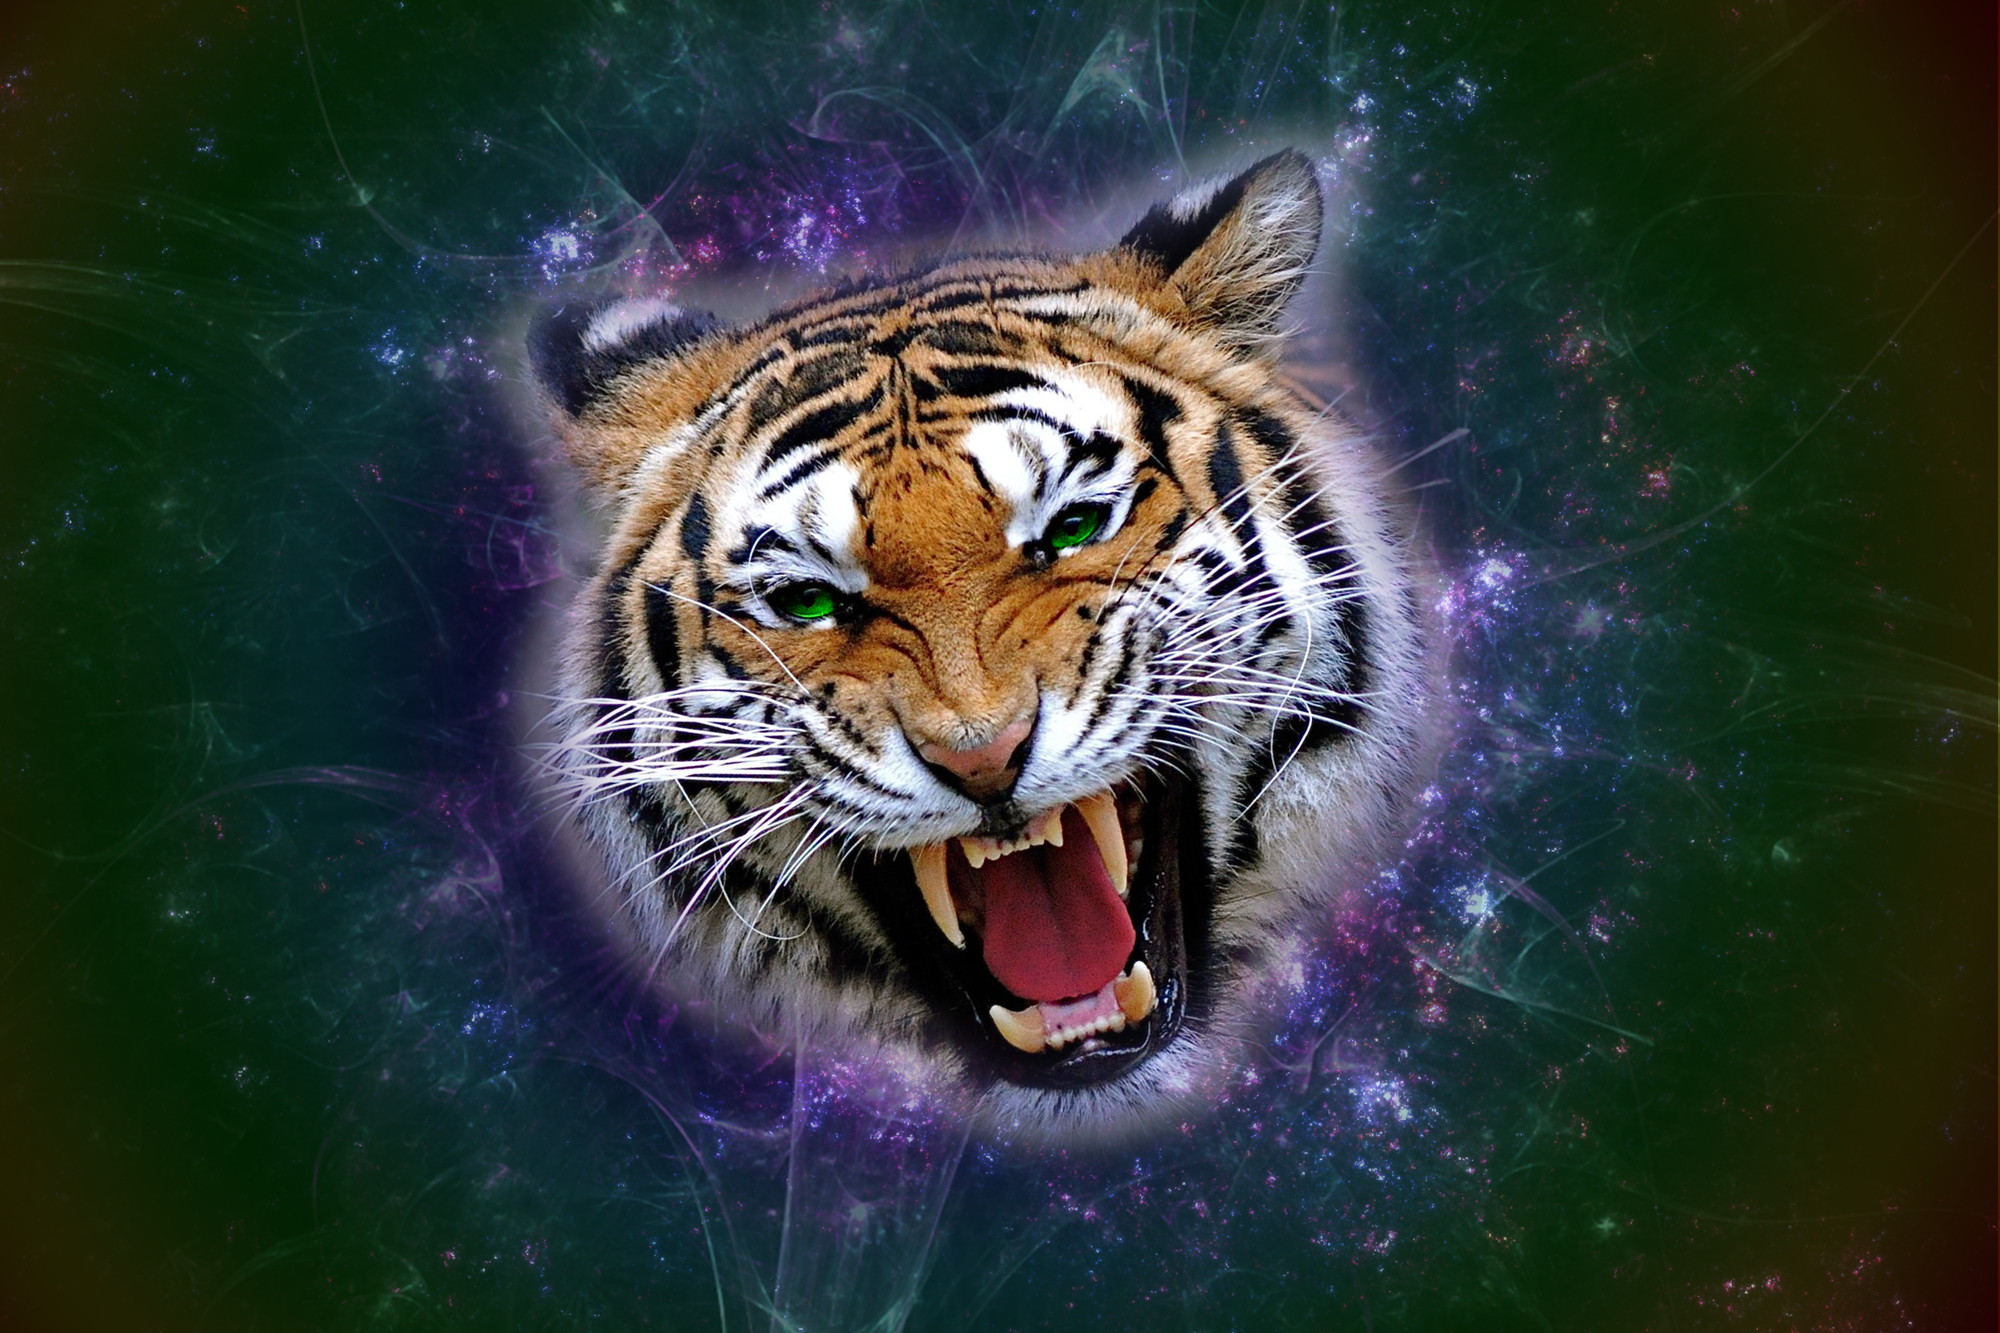 Angry Tiger by Bixile on